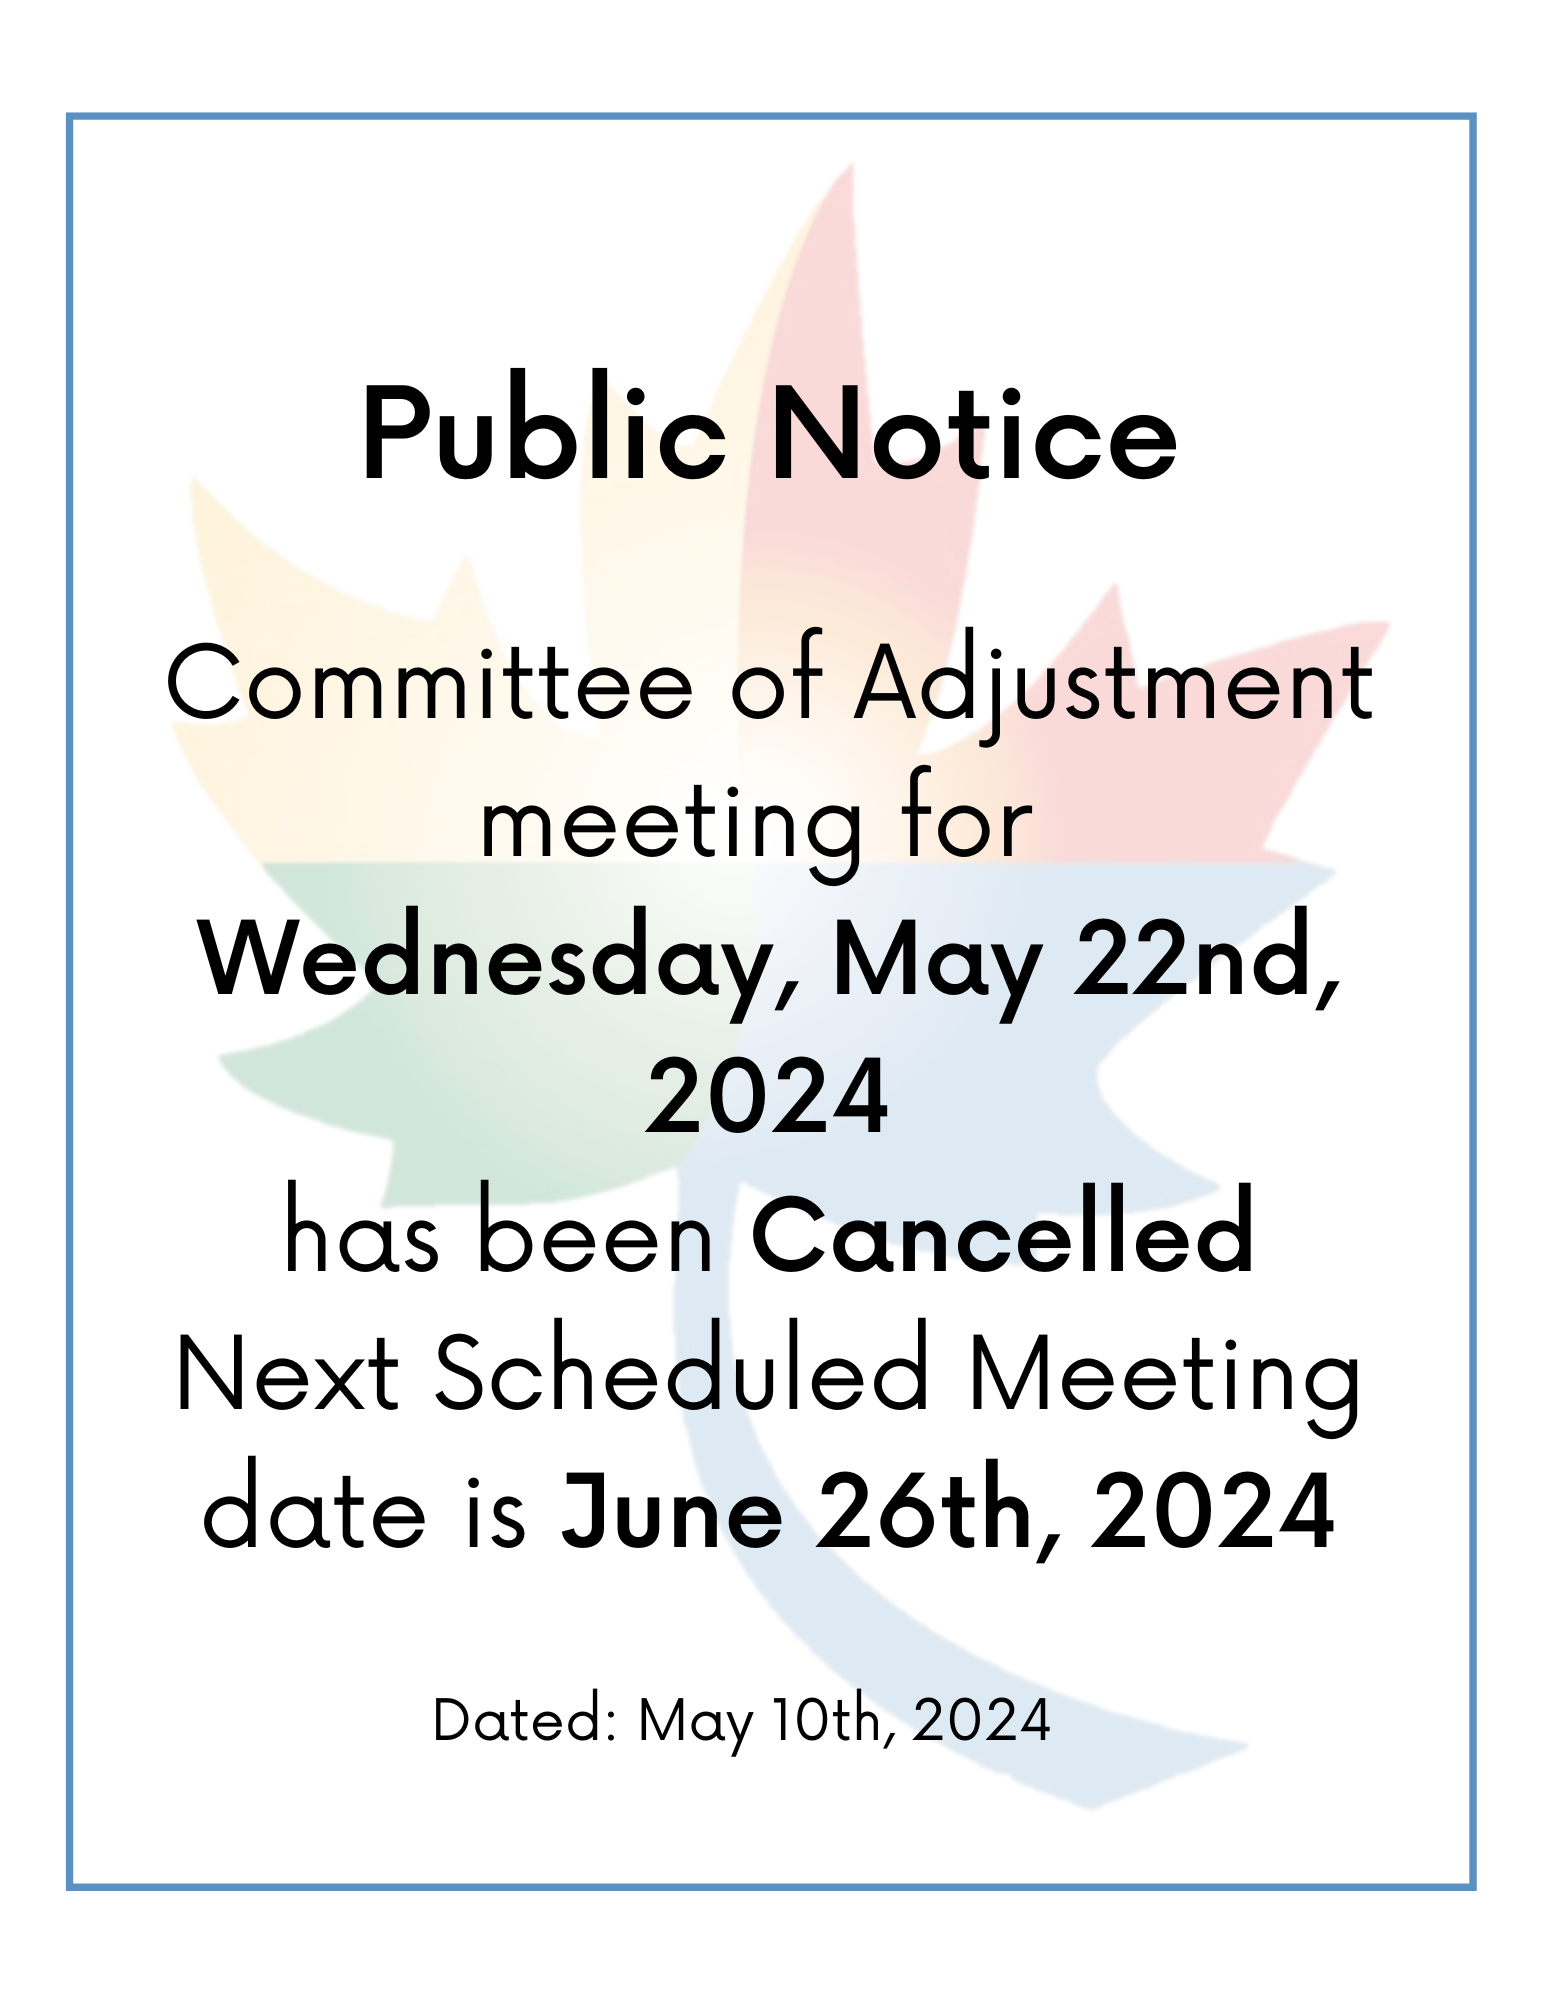 PUBLIC NOTICE Committee of Adjustment Meeting for Wednesday May 22nd has been CANCELLED